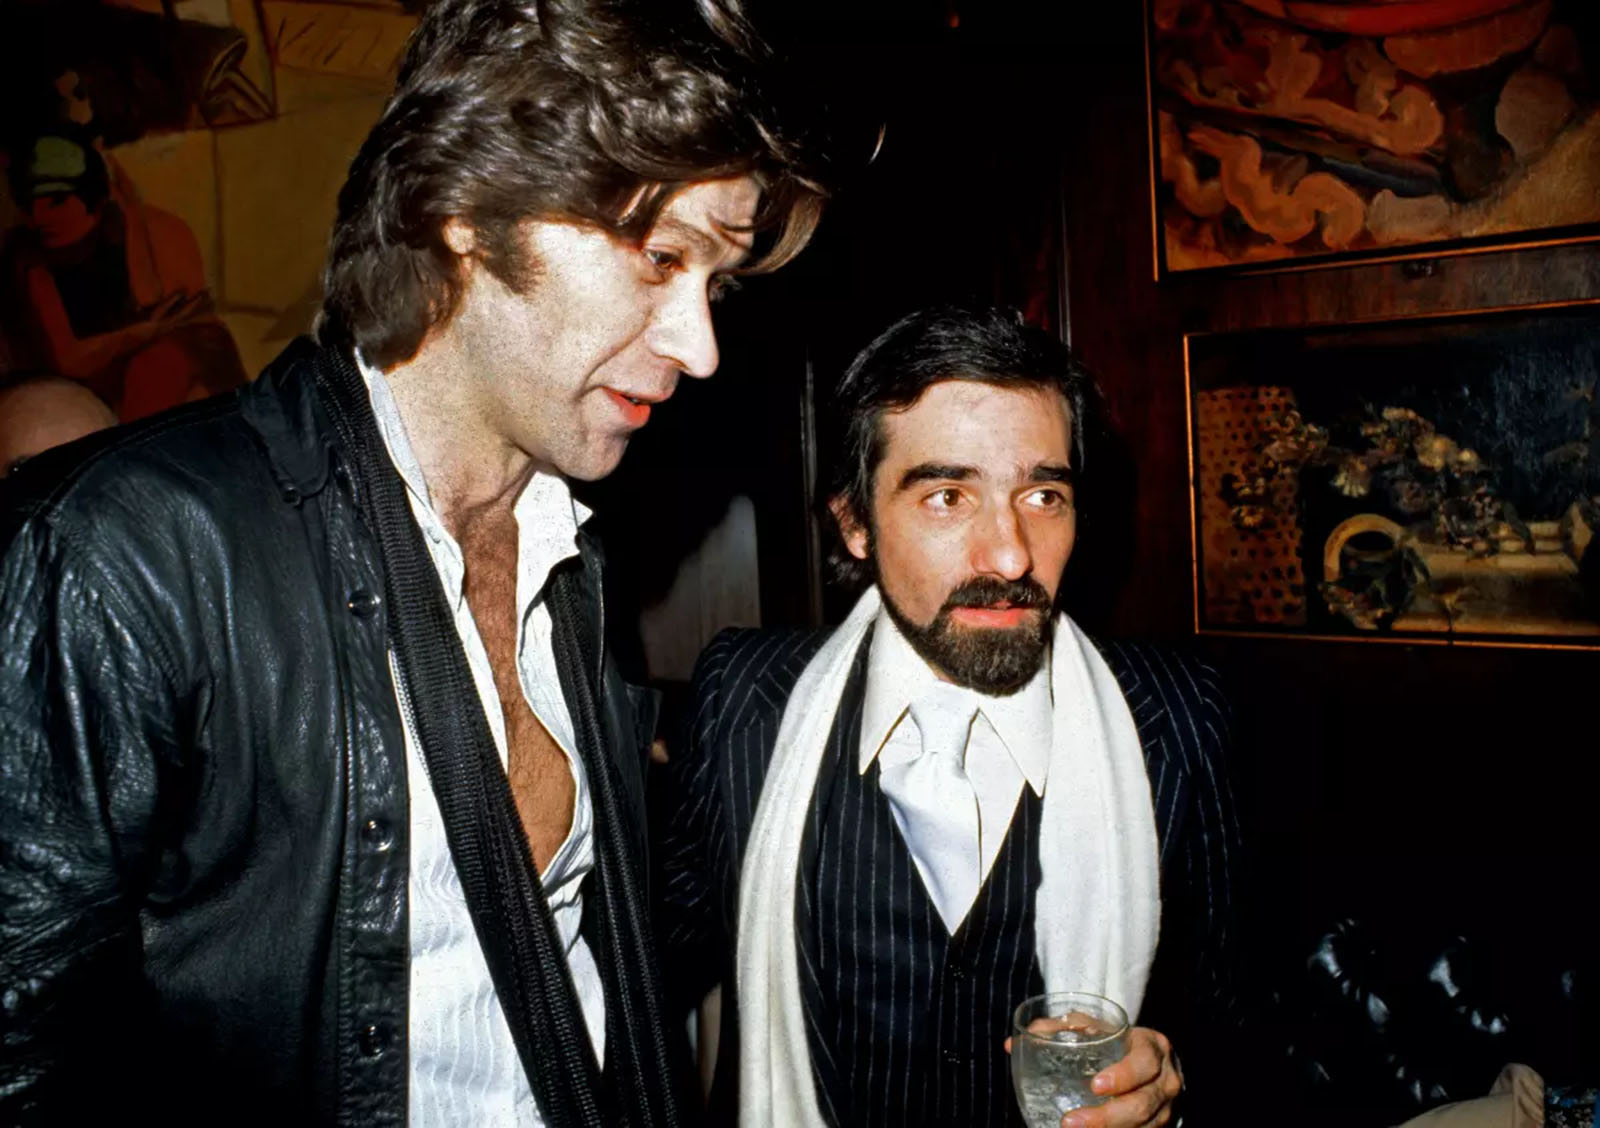 Scorsese in 1978 with longtime collaborator Robbie Robertson. Image © Redferns